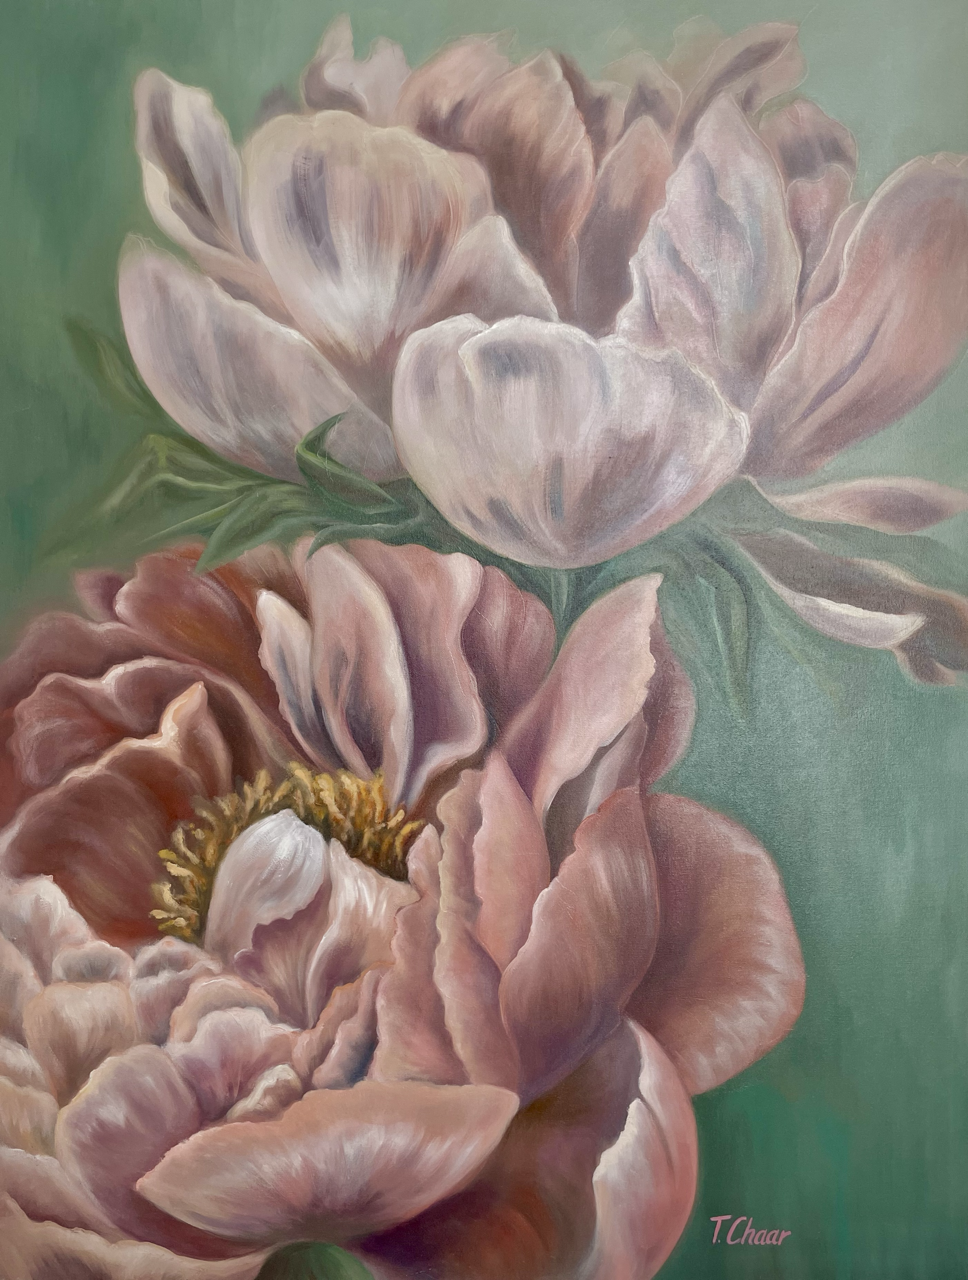 Coral Peonies, oil on canvas.